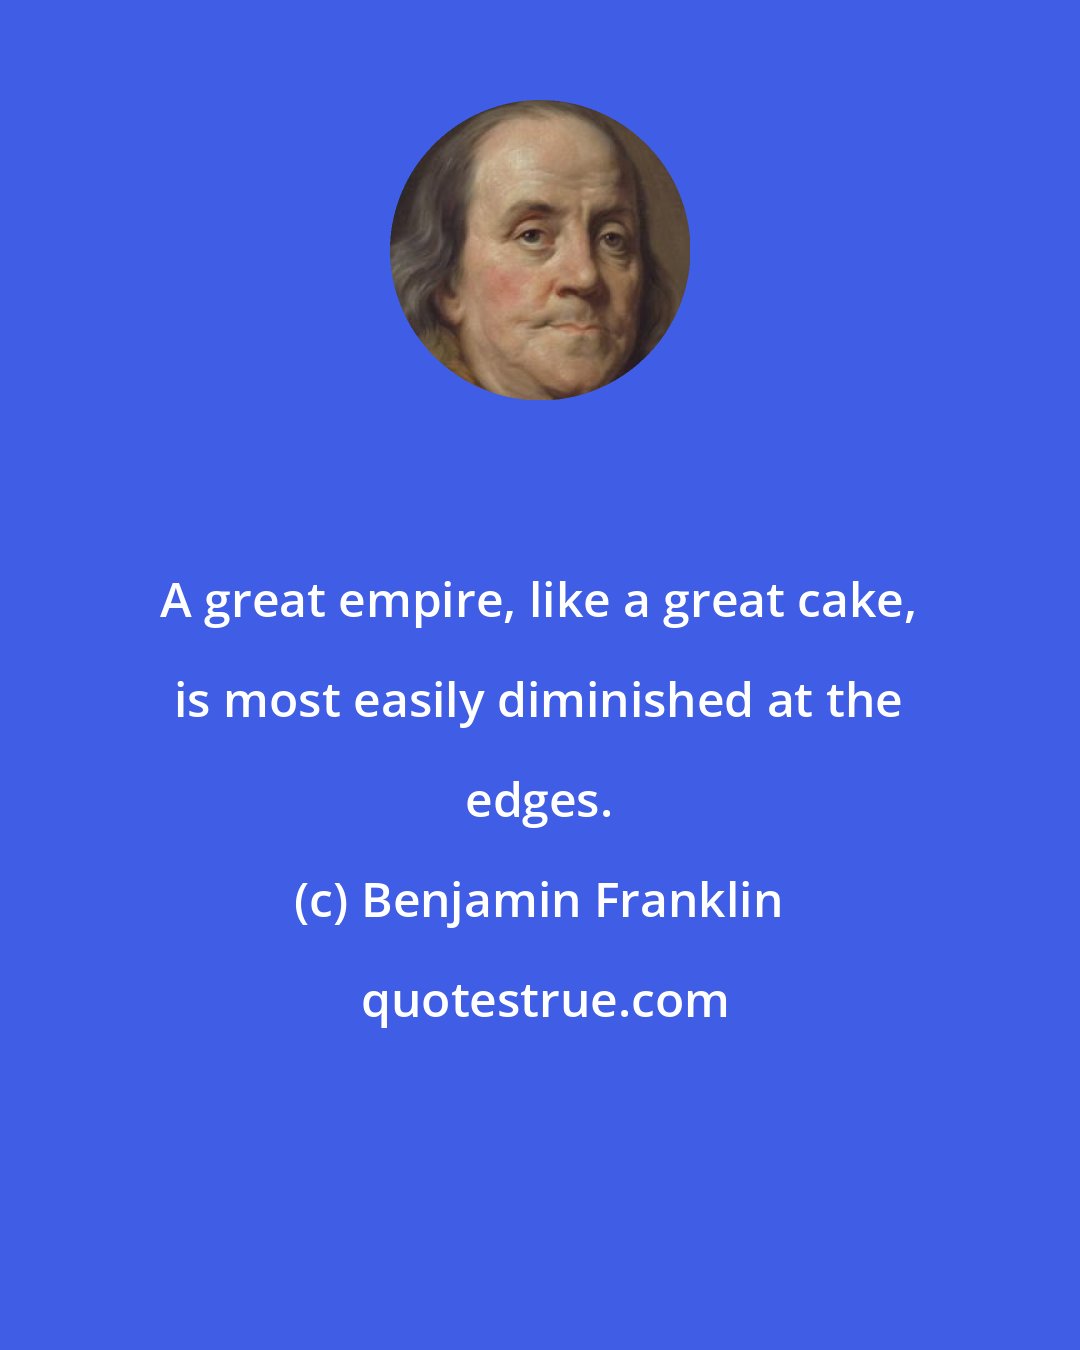 Benjamin Franklin: A great empire, like a great cake, is most easily diminished at the edges.